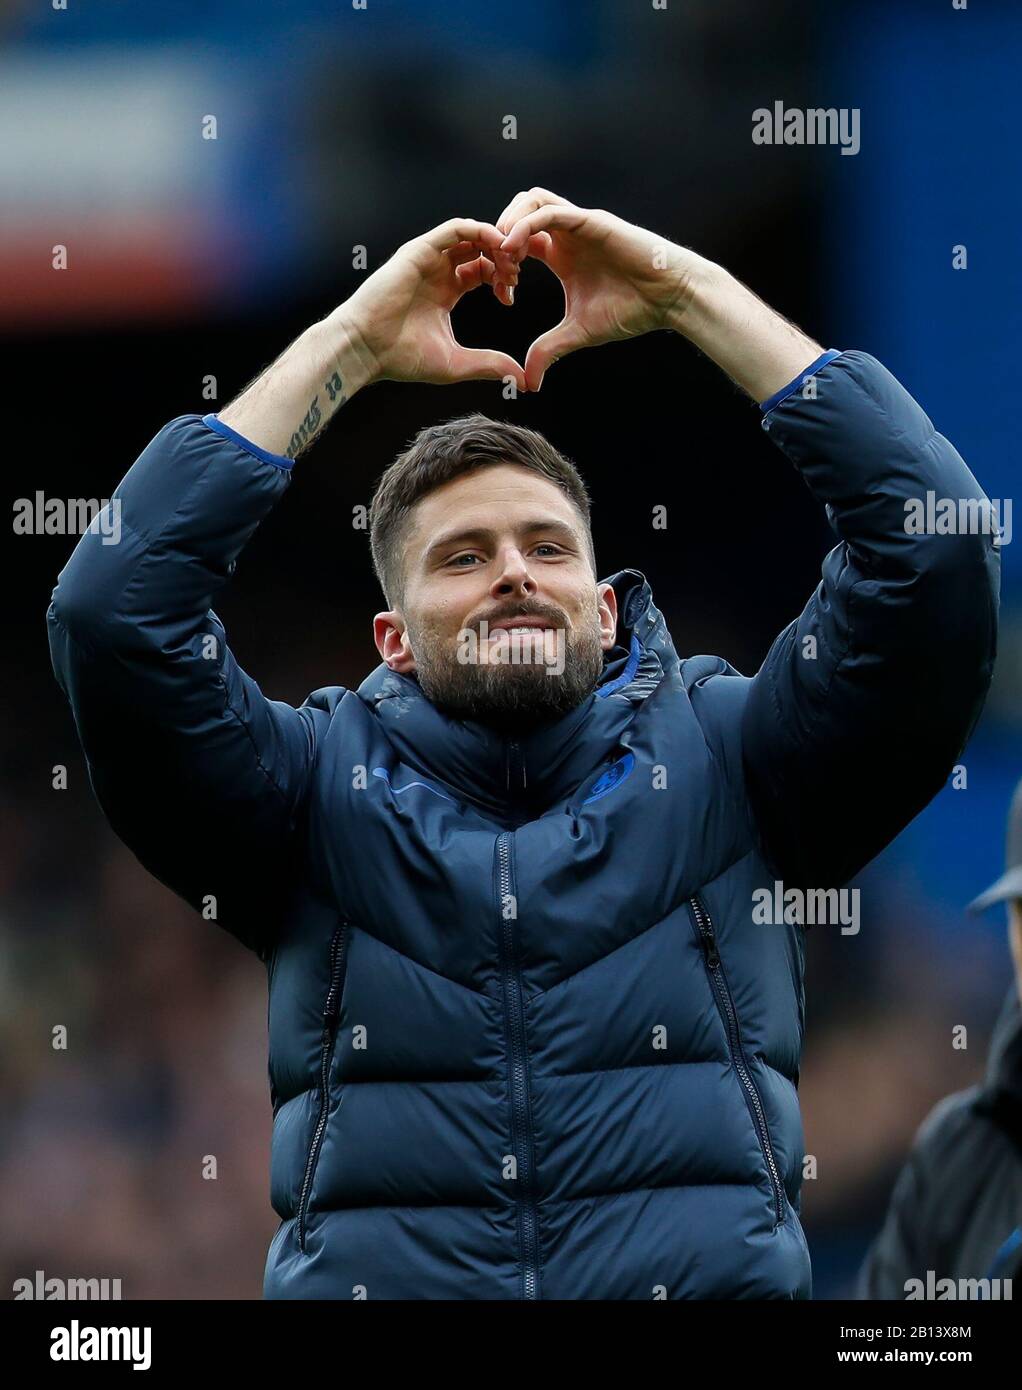 London, UK. 22nd Feb, 2020. Chelsea's Olivier Giroud gestures after the Premier League London Derby match between Chelsea and Tottenham Hotspur at Stamford Bridge Stadium in London, Britain on Feb. 22, 2020. Credit: Han Yan/Xinhua/Alamy Live News Stock Photo